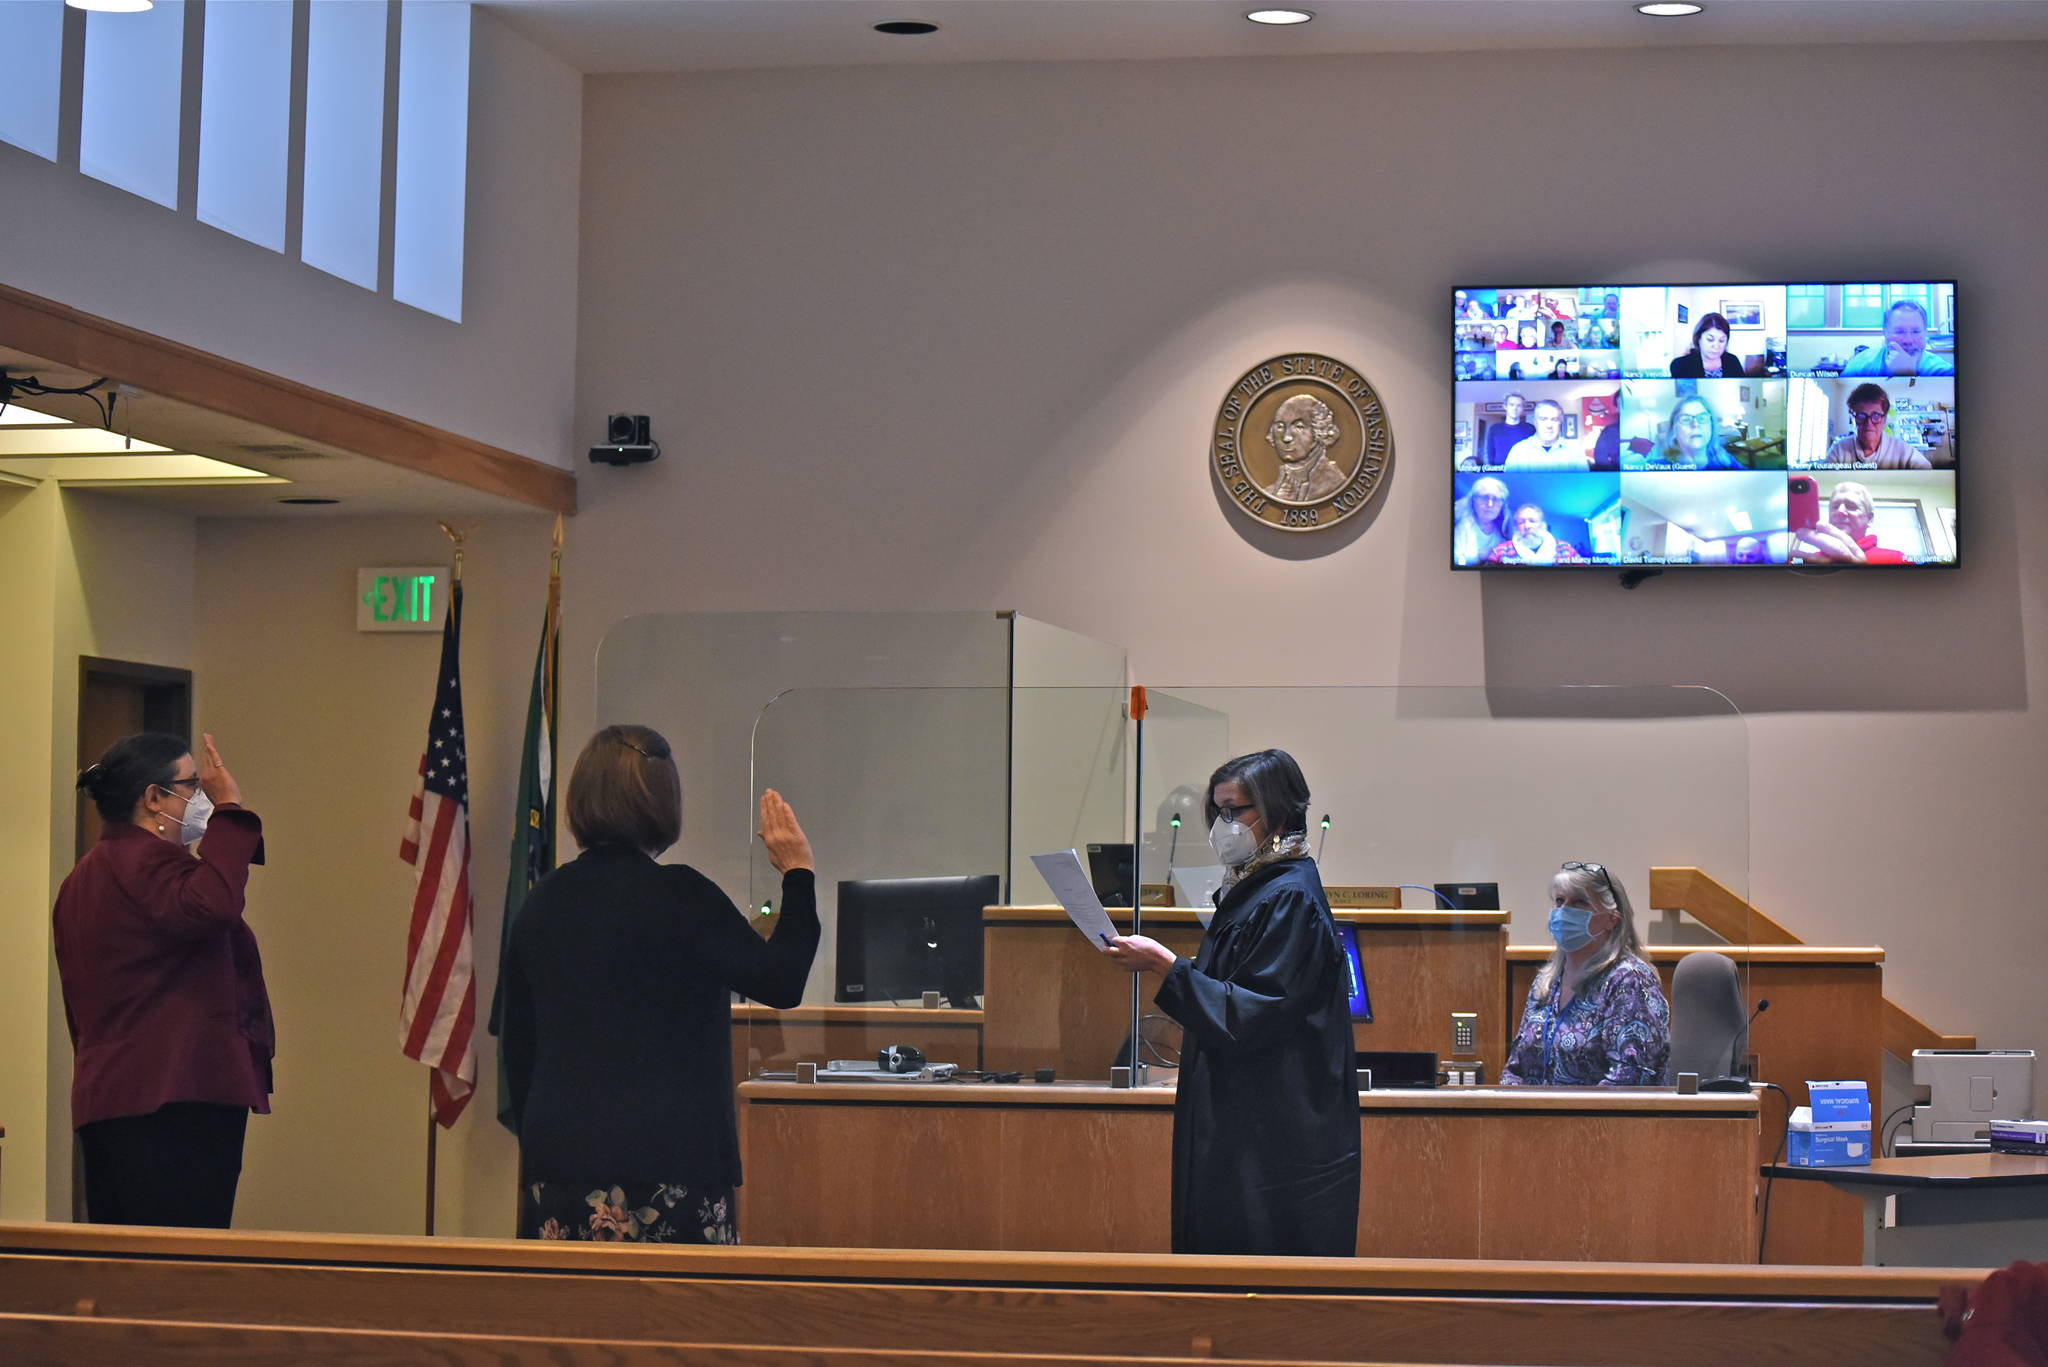 Tate Thomson/Staff photo
On Dec. 29, Christine Minney and Cindy Wolf were sworn into office by San Juan County Superior Court Judge Katheryn Loring.